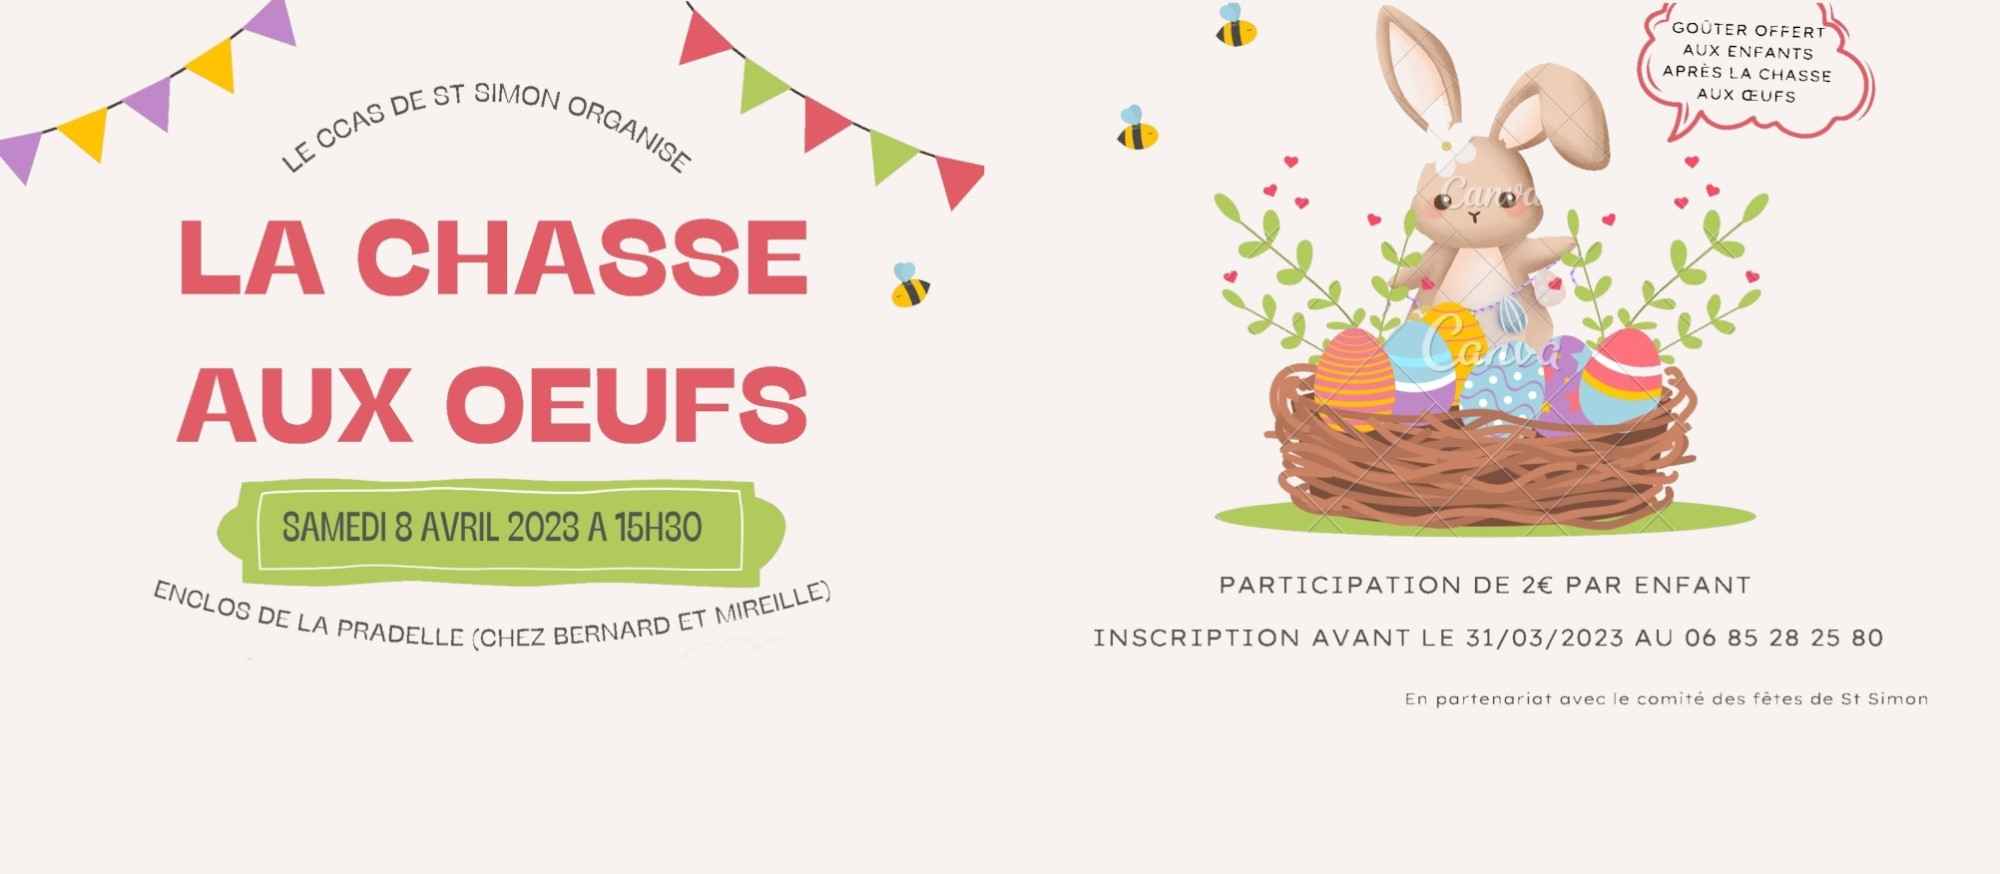 CHASSE AUX OEUFS LAPIN 2